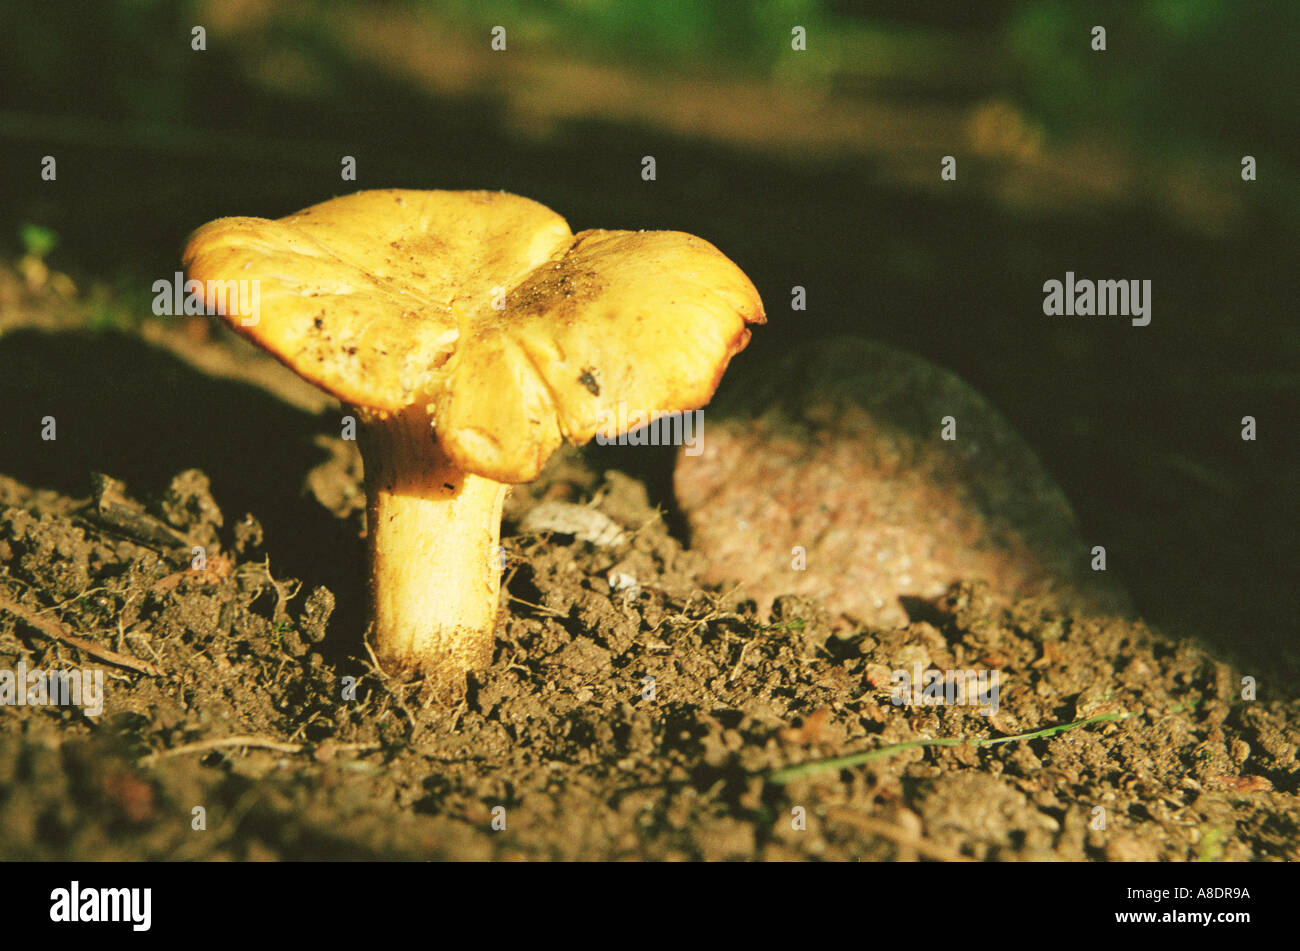 Yellow Chantarelle CANTHARELLUS CIBARIUS delicious edible mushroom photographed in V sterg tland Sweden Stock Photo